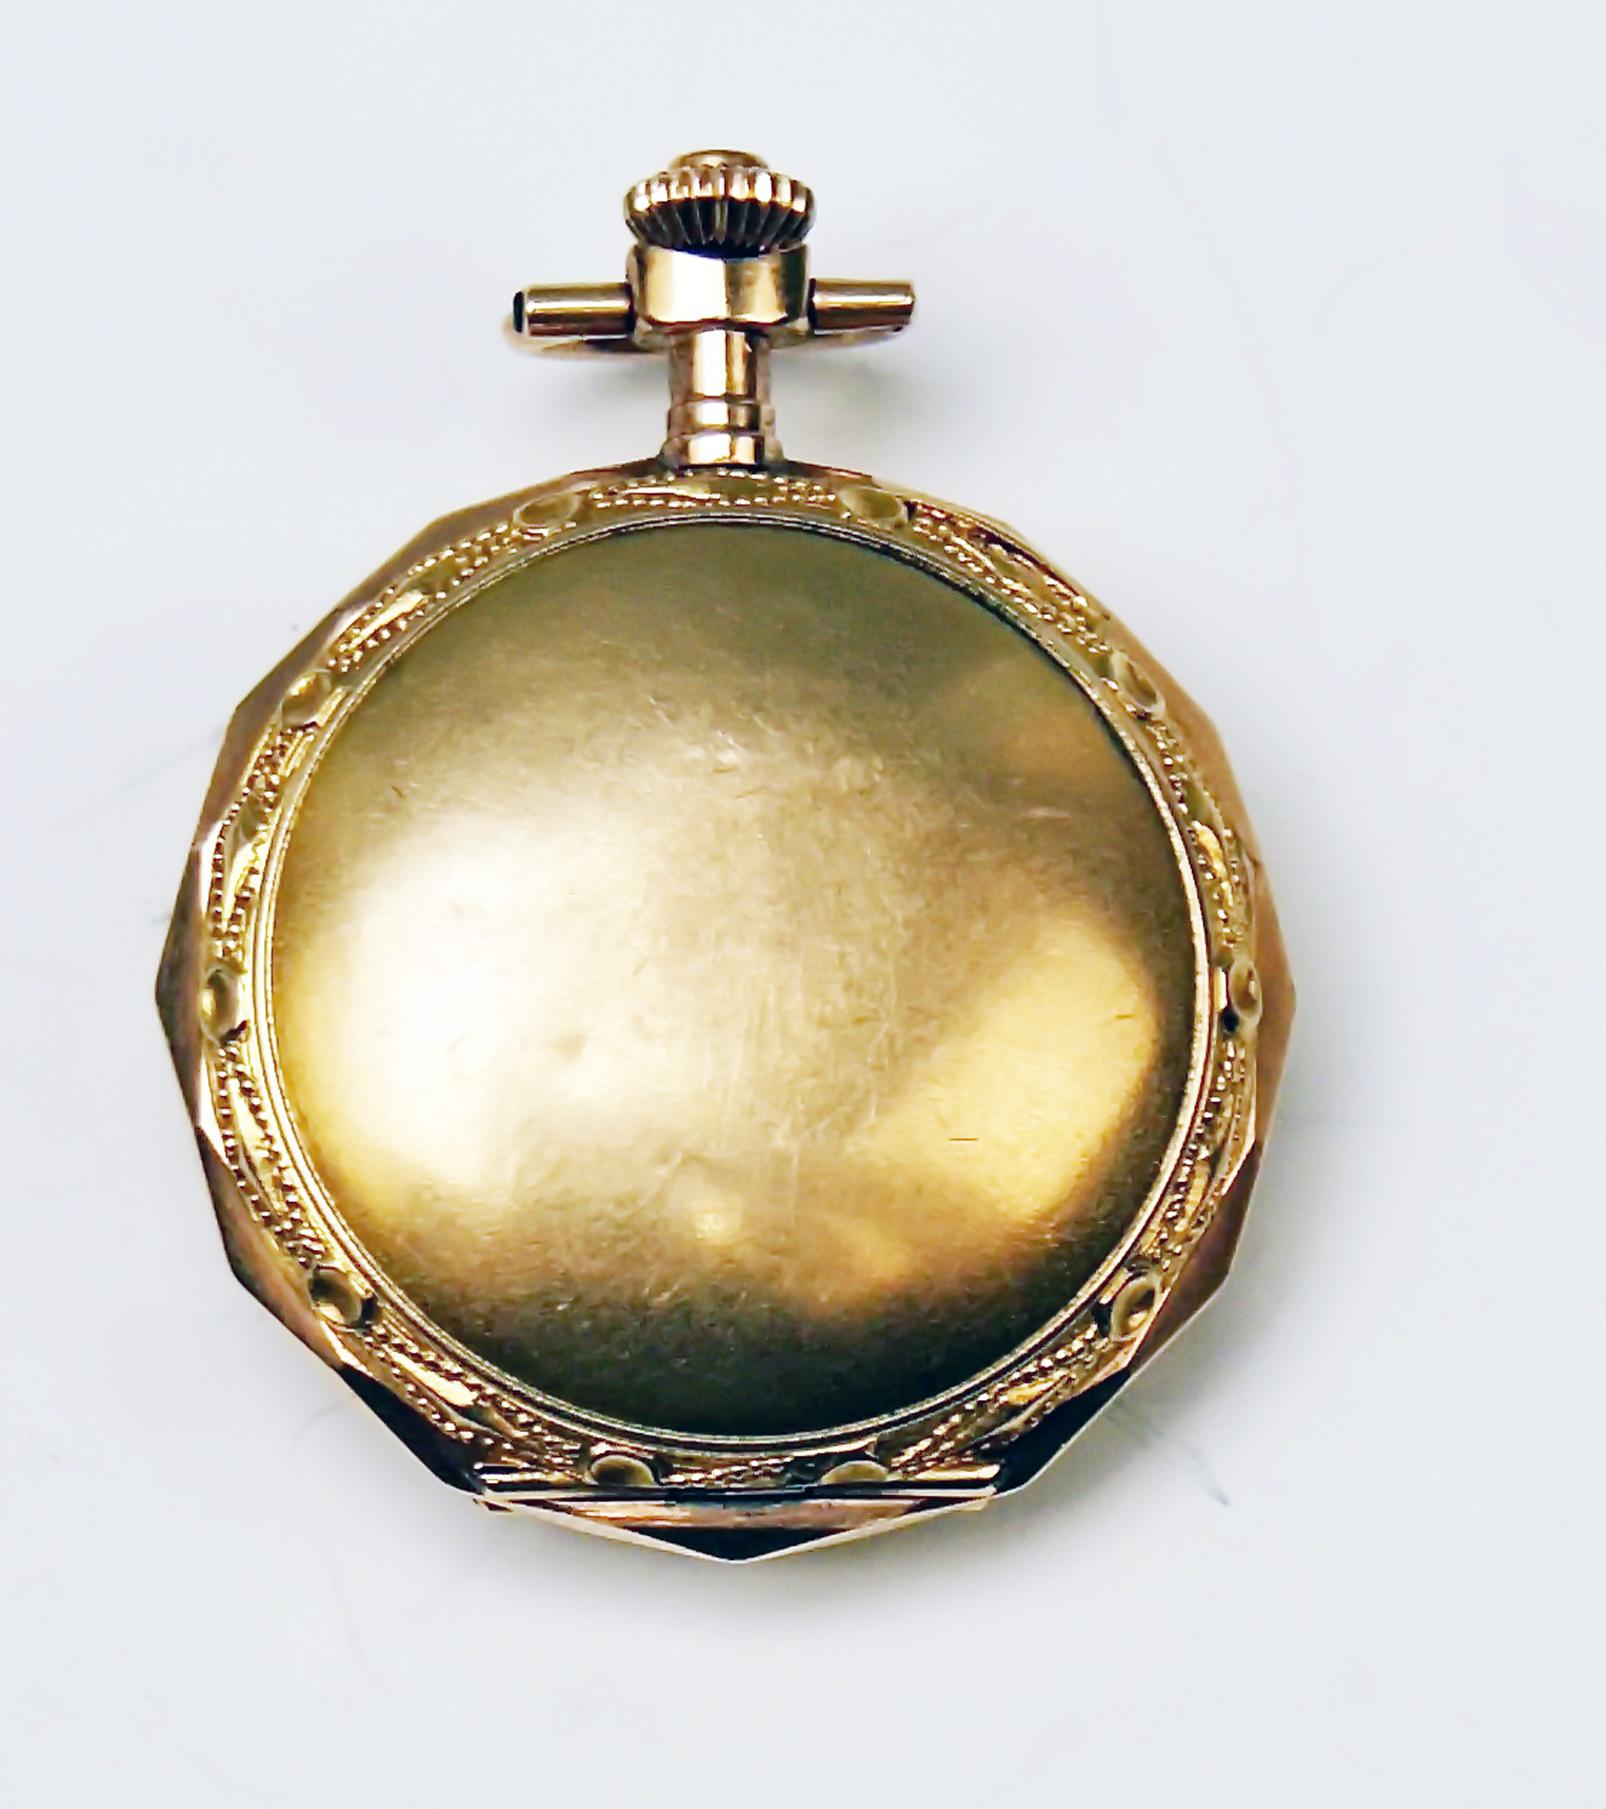 Remontoir Cylindre 10 Rubis Woman's Pocket Watch with three lids.

Made of 14 ct slight red gold, with eight diamonds (= 0,40 ct in total) decorating the lid which covers clockface
(= all three lids - lid covering backside & lid covering clock's